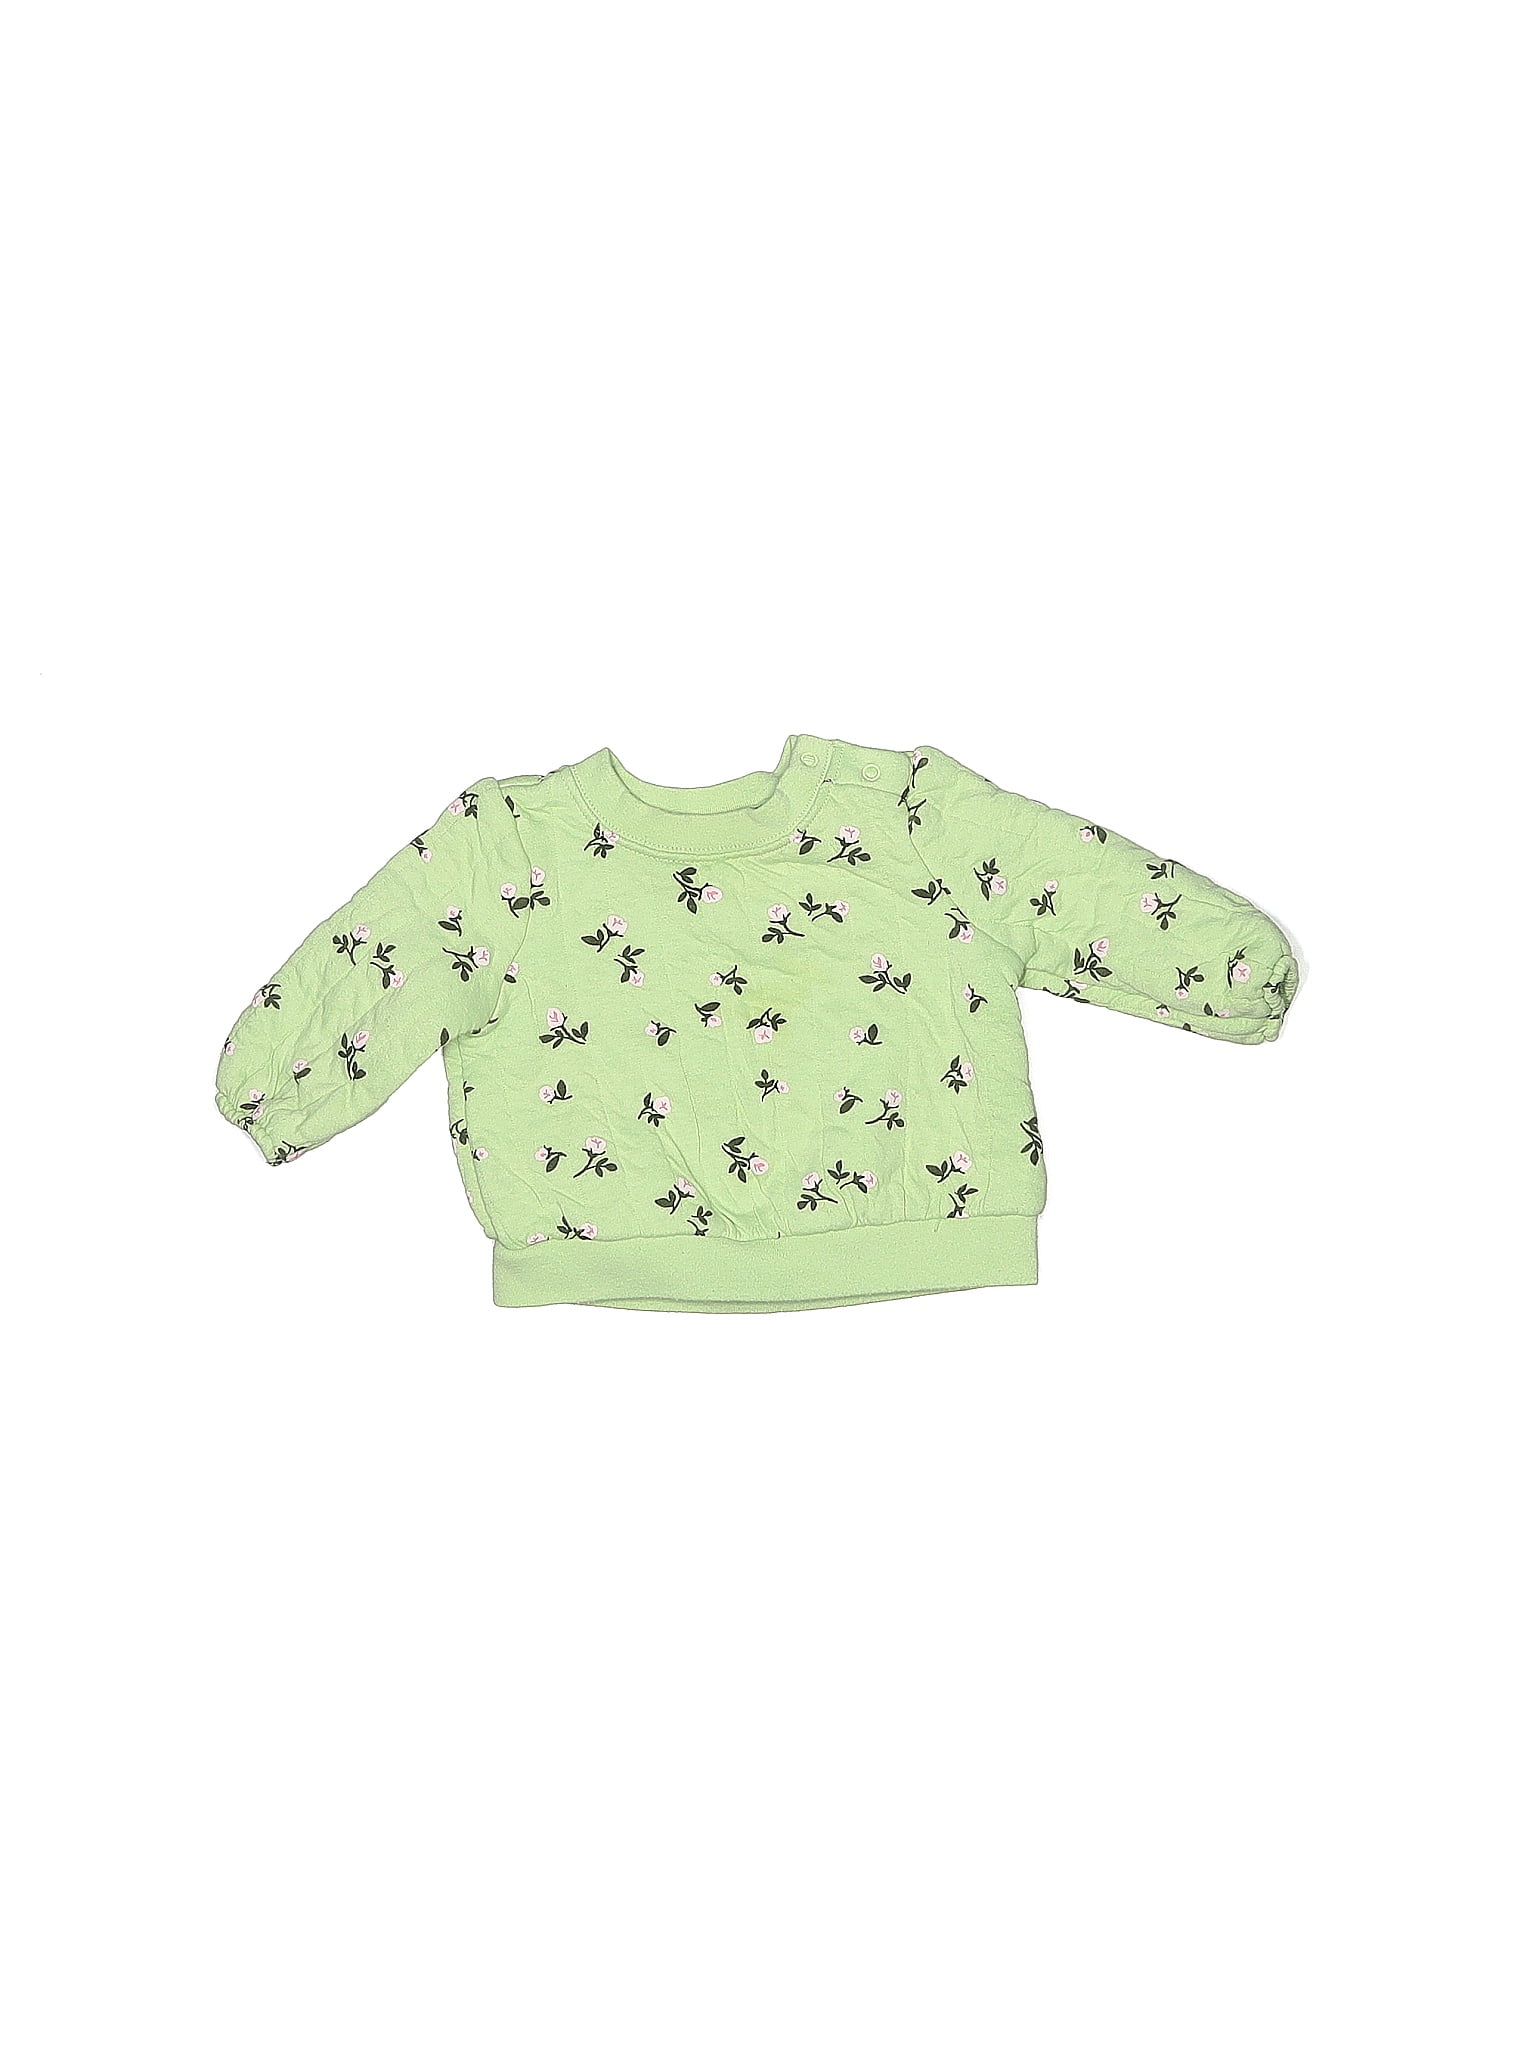 Cat & Jack Green Pullover Sweater Size 3-6 mo - 15% off | thredUP